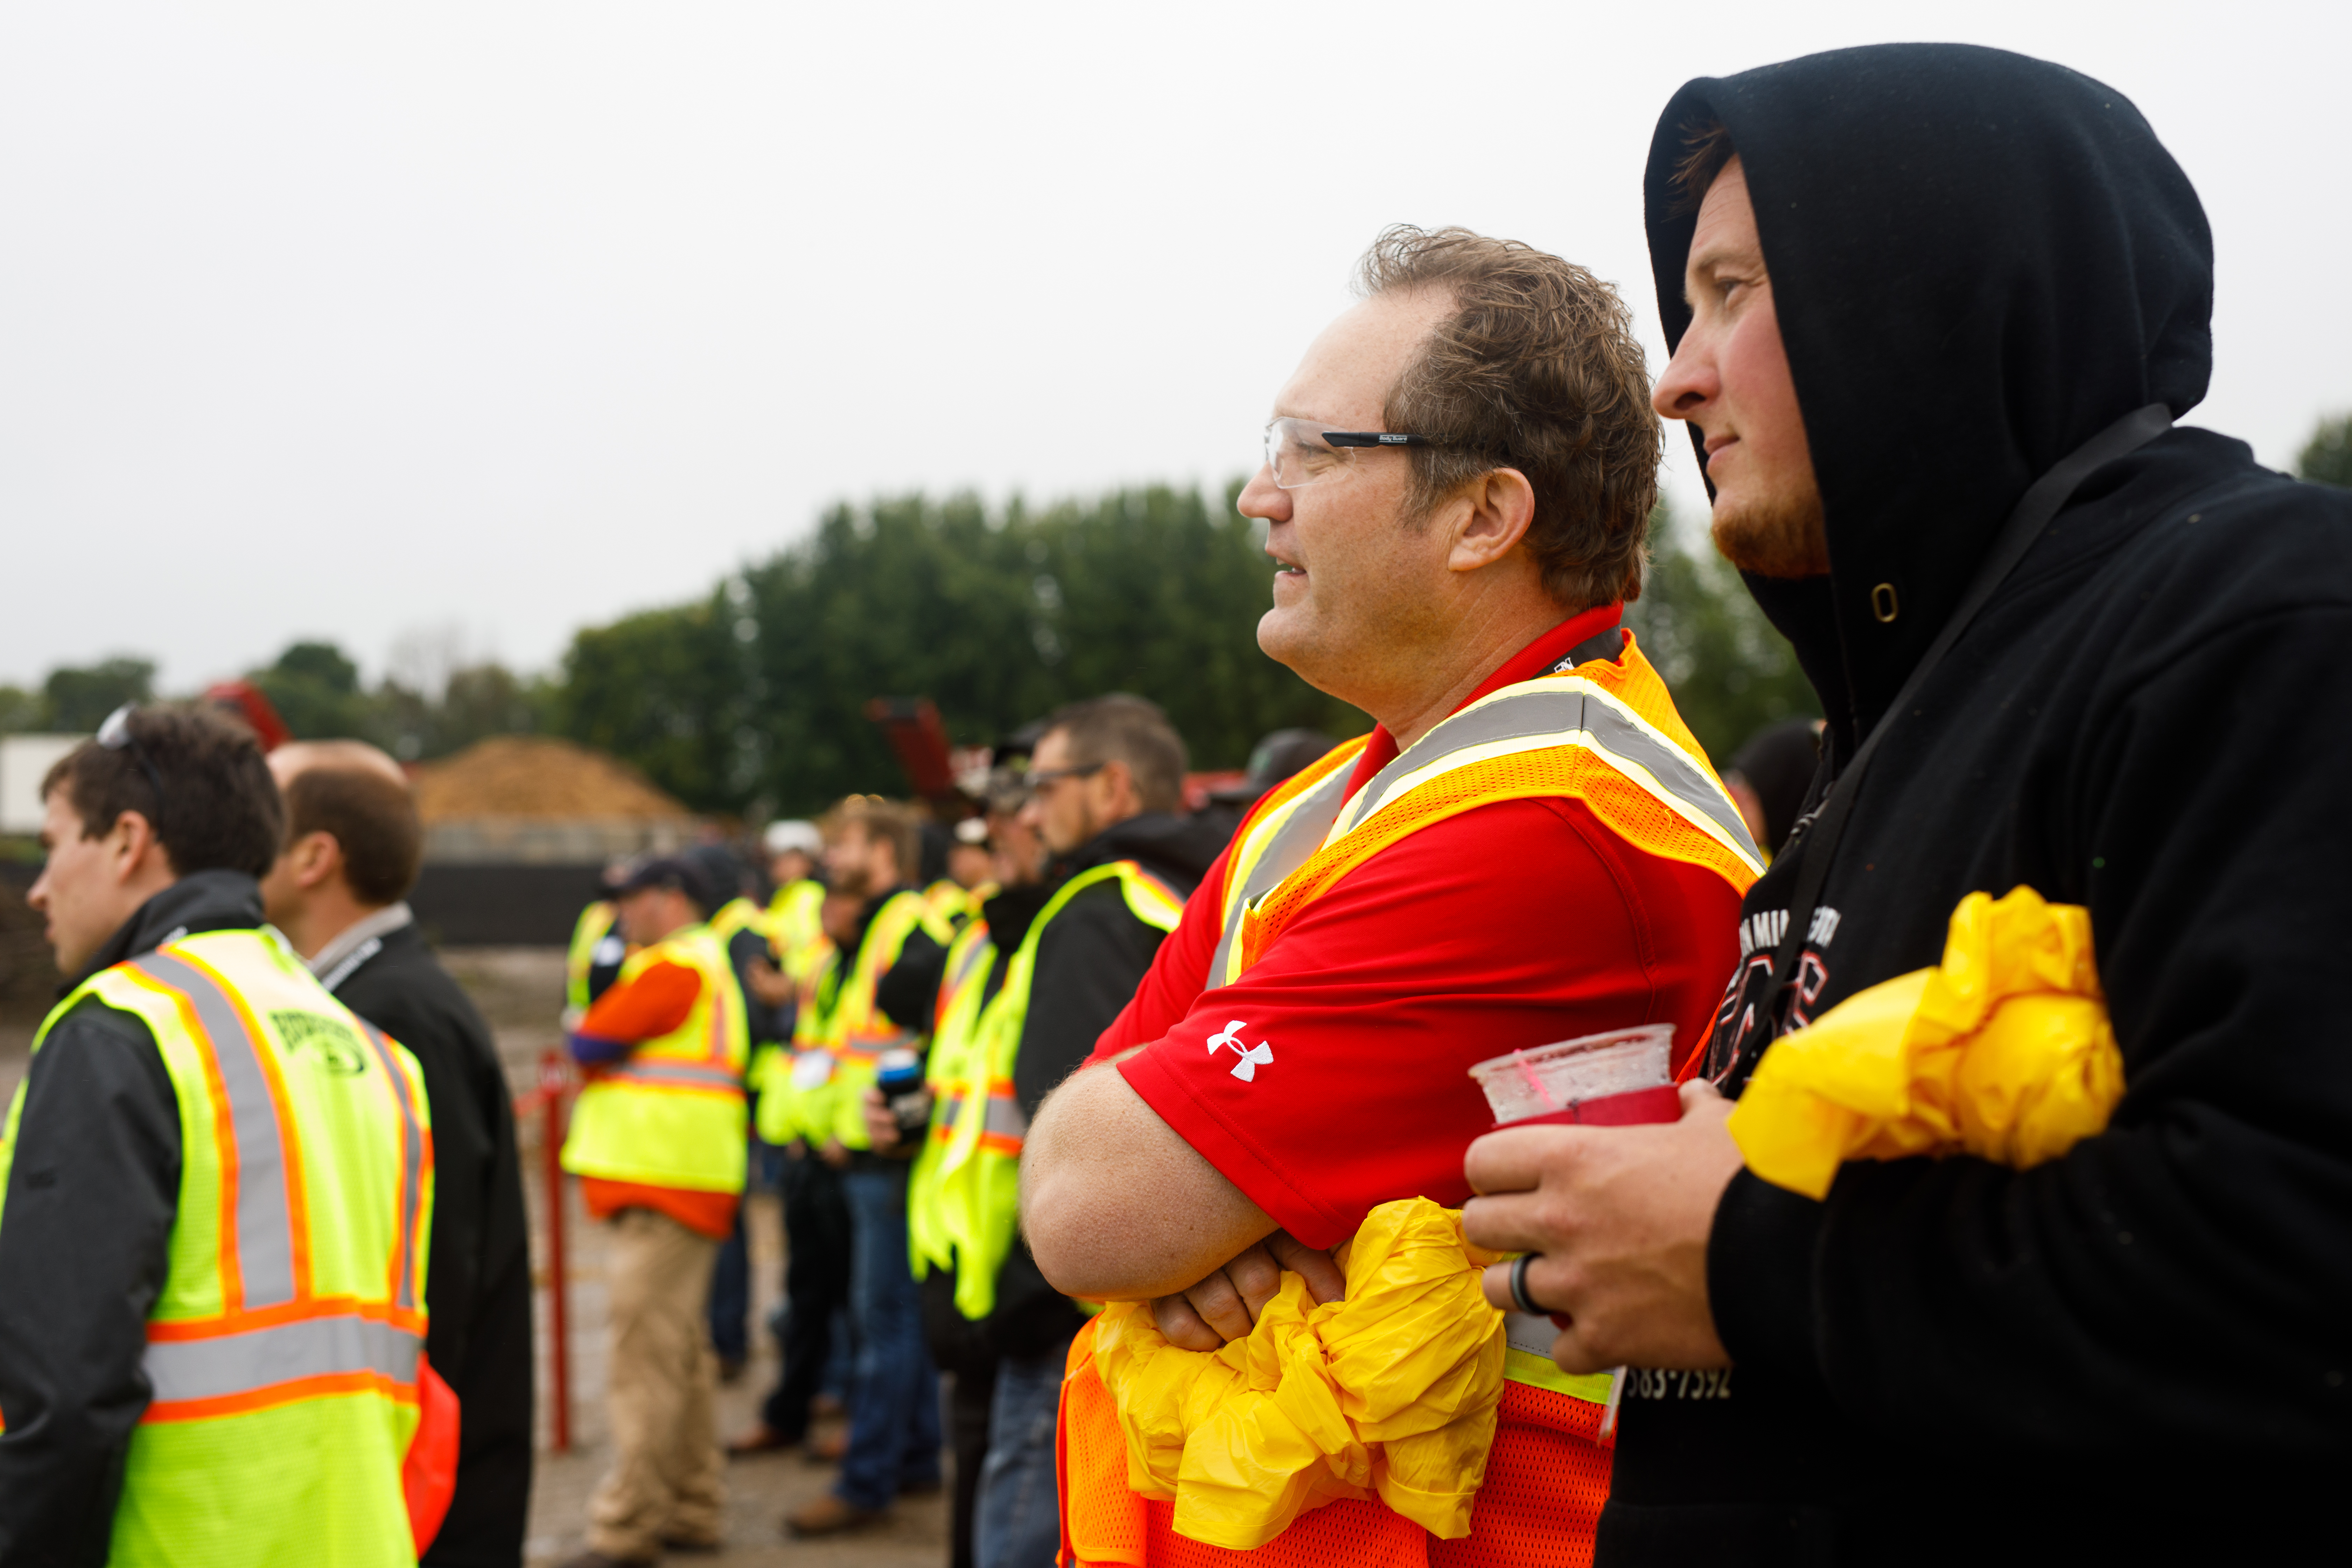 A group of men wearing safety vests, all paying close attention to a demonstration at Rotochopper's demo day event.